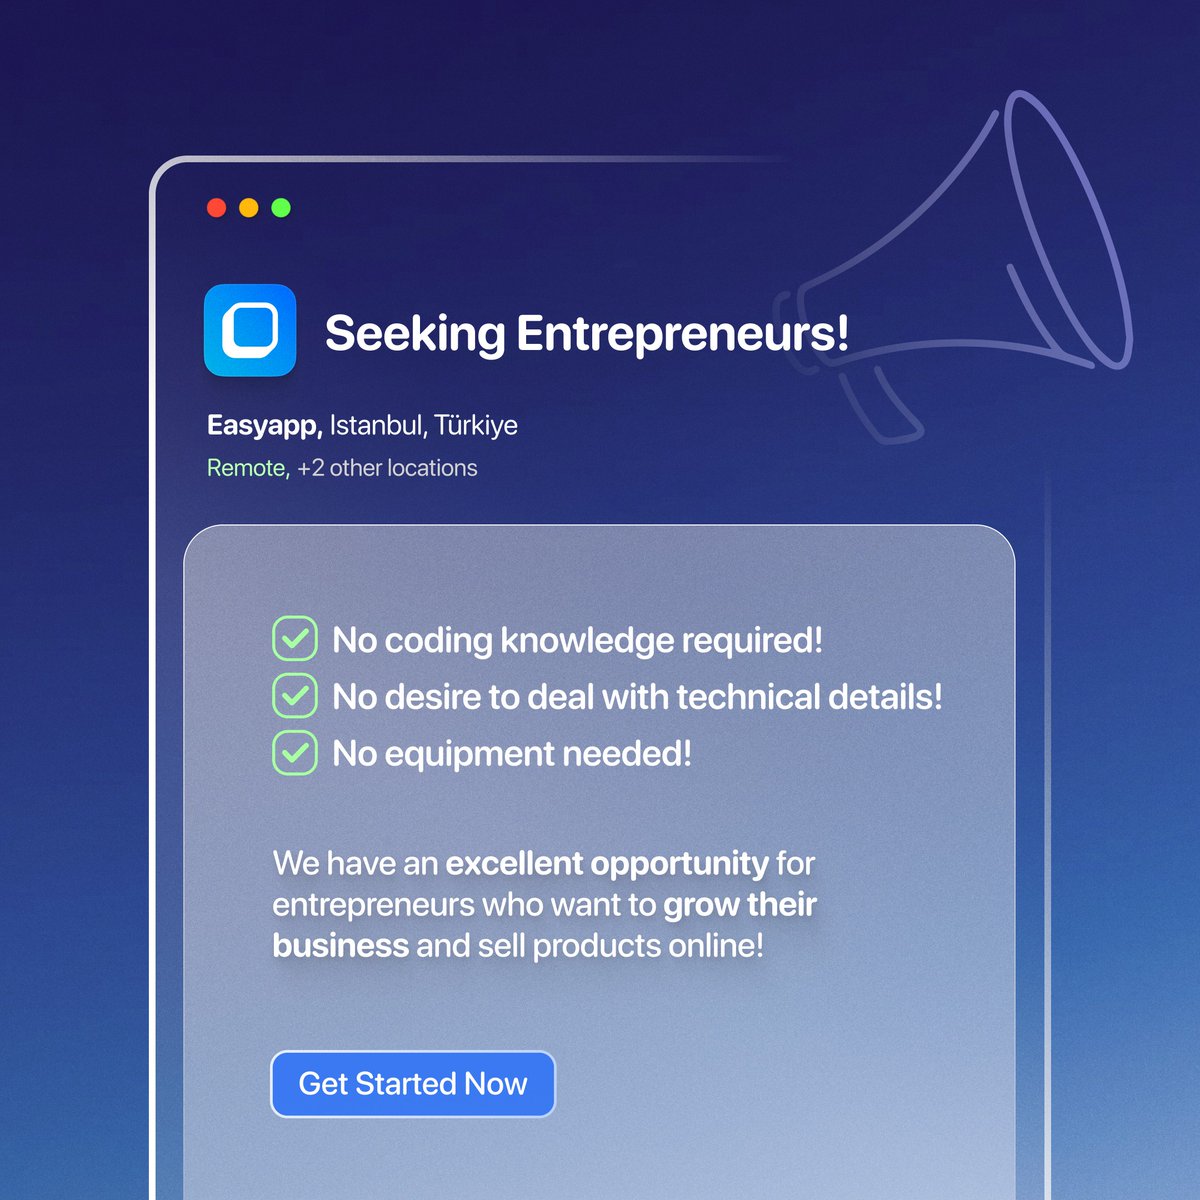 📣Seeking Entrepreneurs!
☑️No coding knowledge required!
☑️No desire to deal with technical details!
☑️No equipment needed!

We have an excellent opportunity for entrepreneurs who want to grow their business and sell products online!

Get started now 📲 easyapp.co/download/app